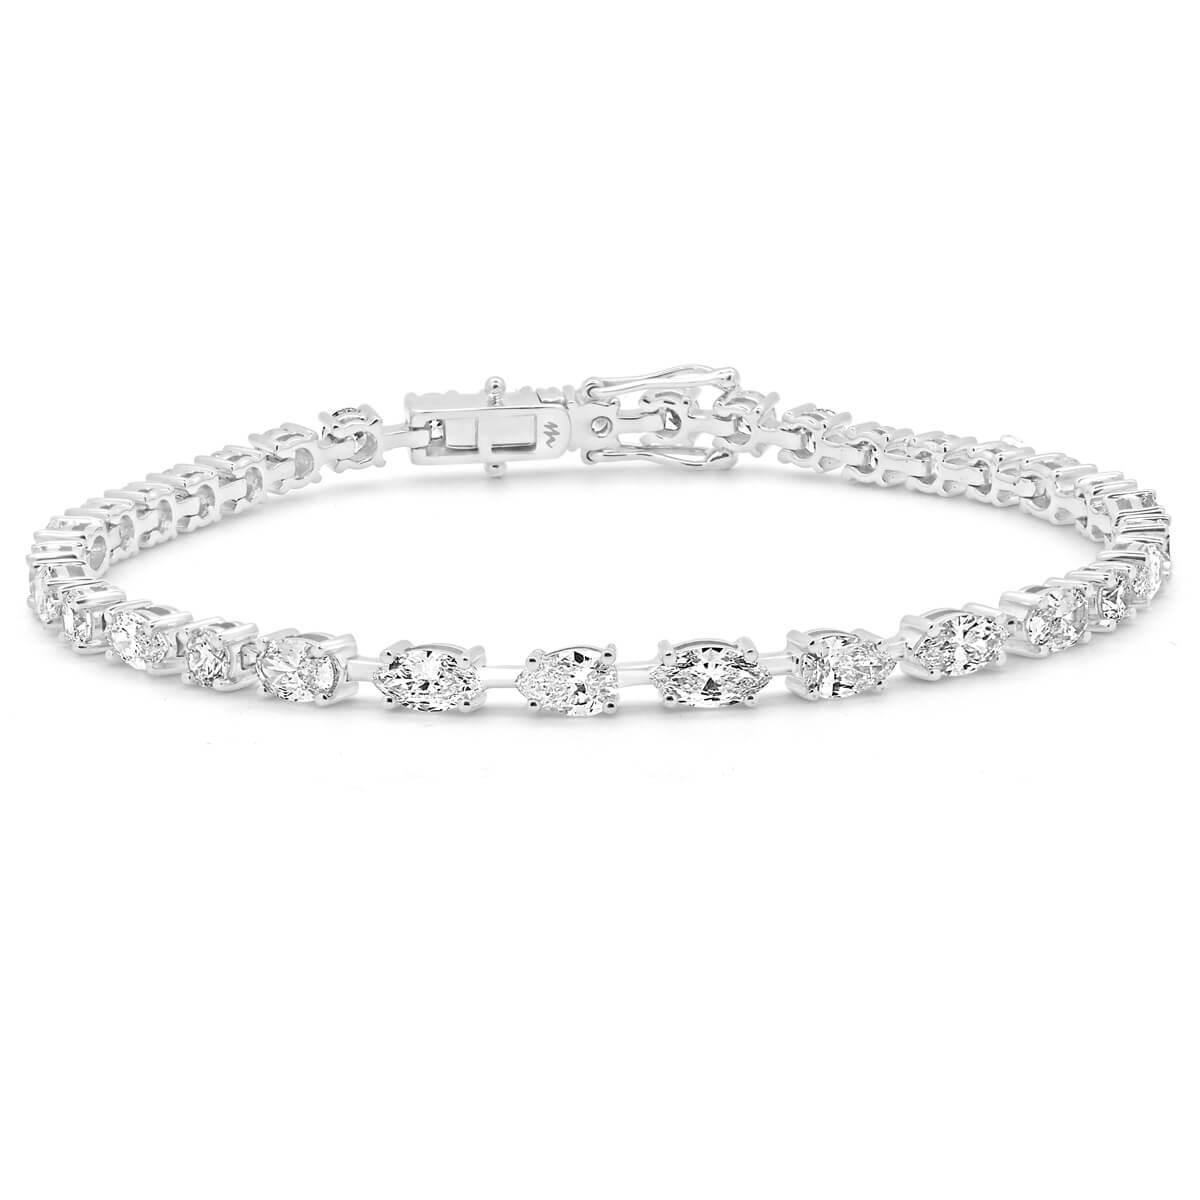 Kayleigh 4.0 Sn Round And Mix Fancy Cut Moissanite Bracelet